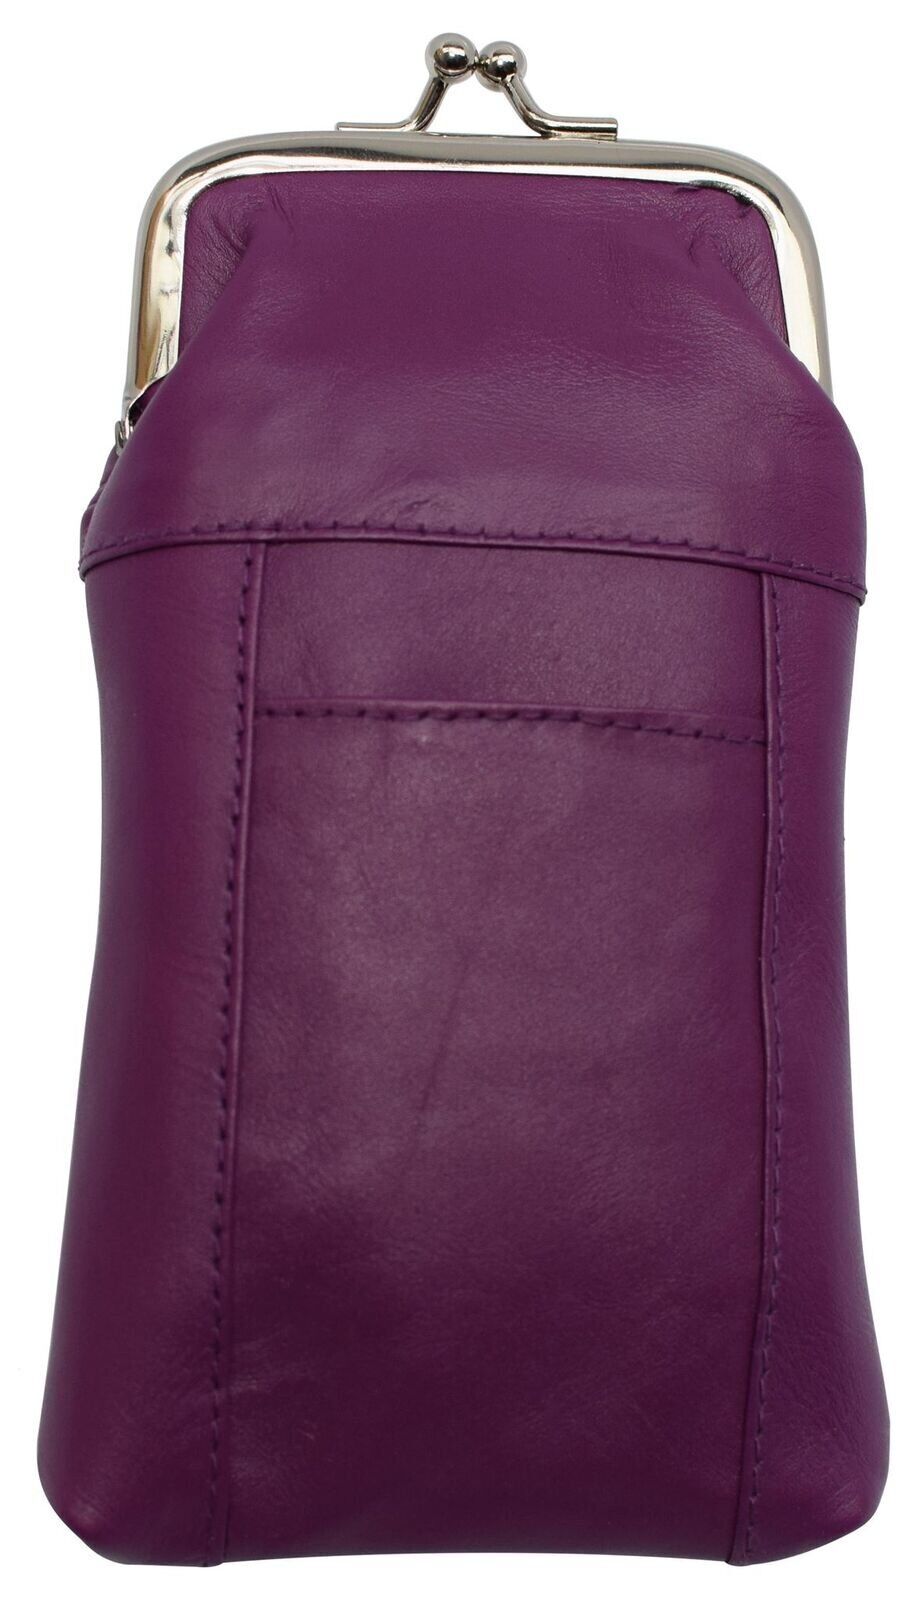 Genuine Leather Cigarette Case with Lighter Pouch Purple by Marshal